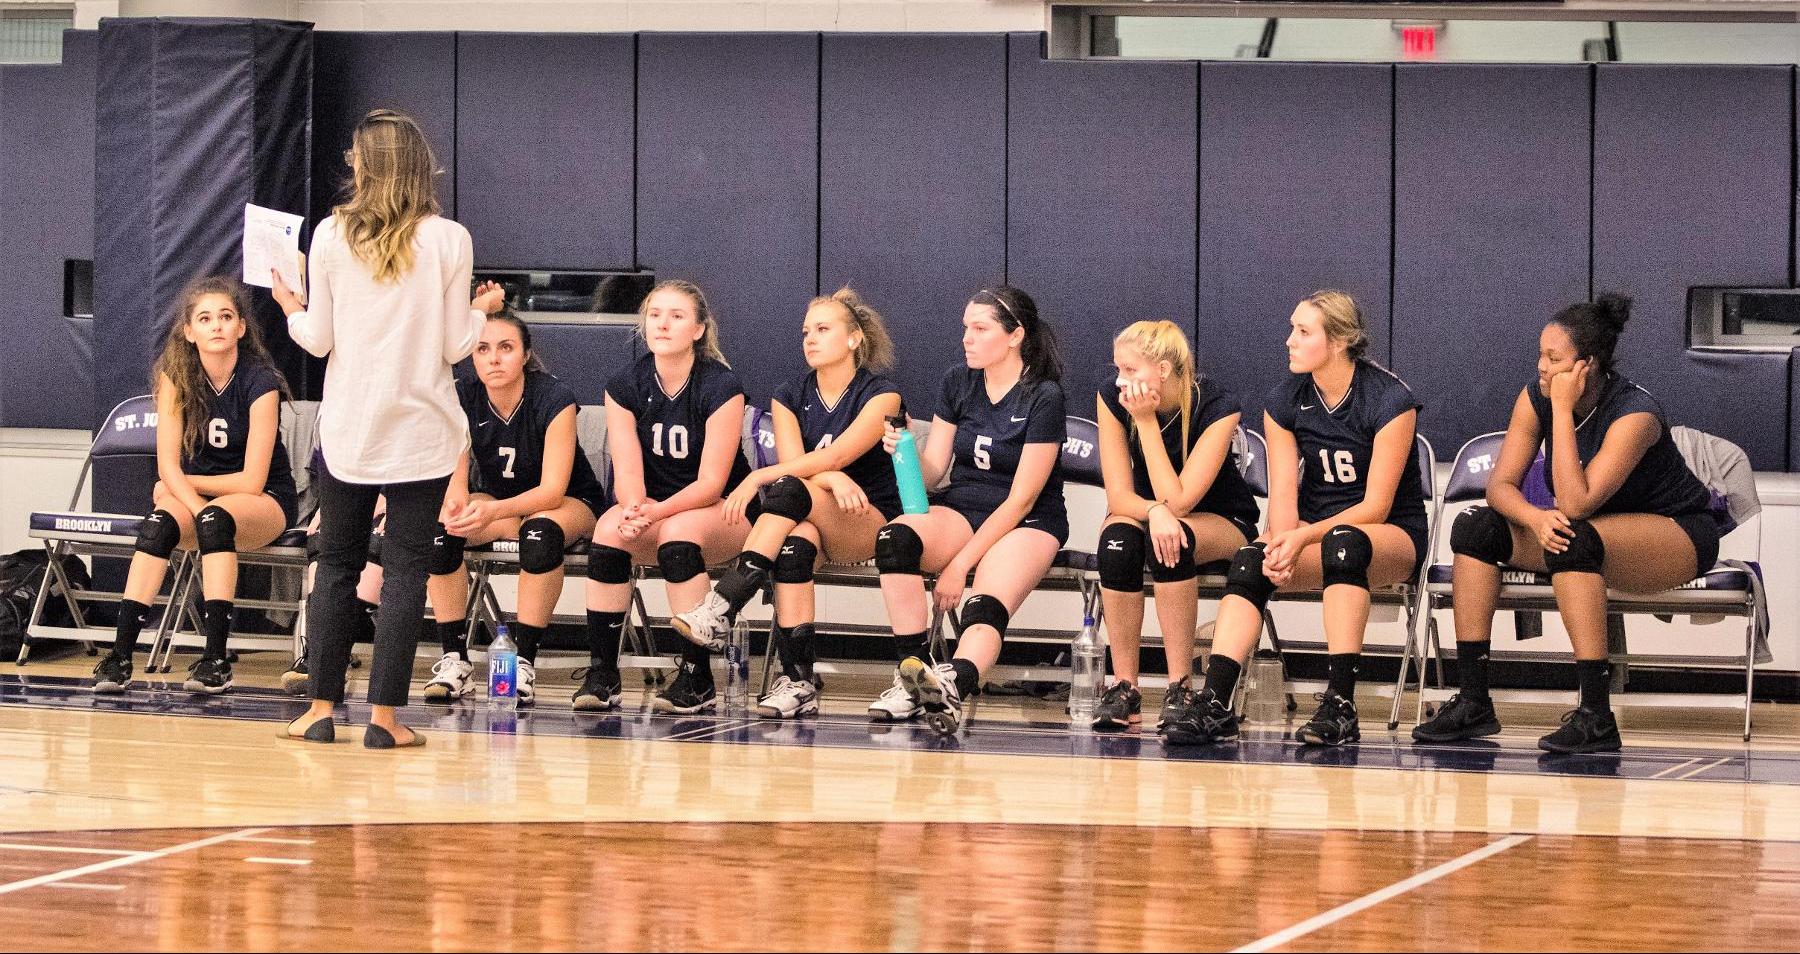 Women's Volleyball Spiked by Sarah Lawrence